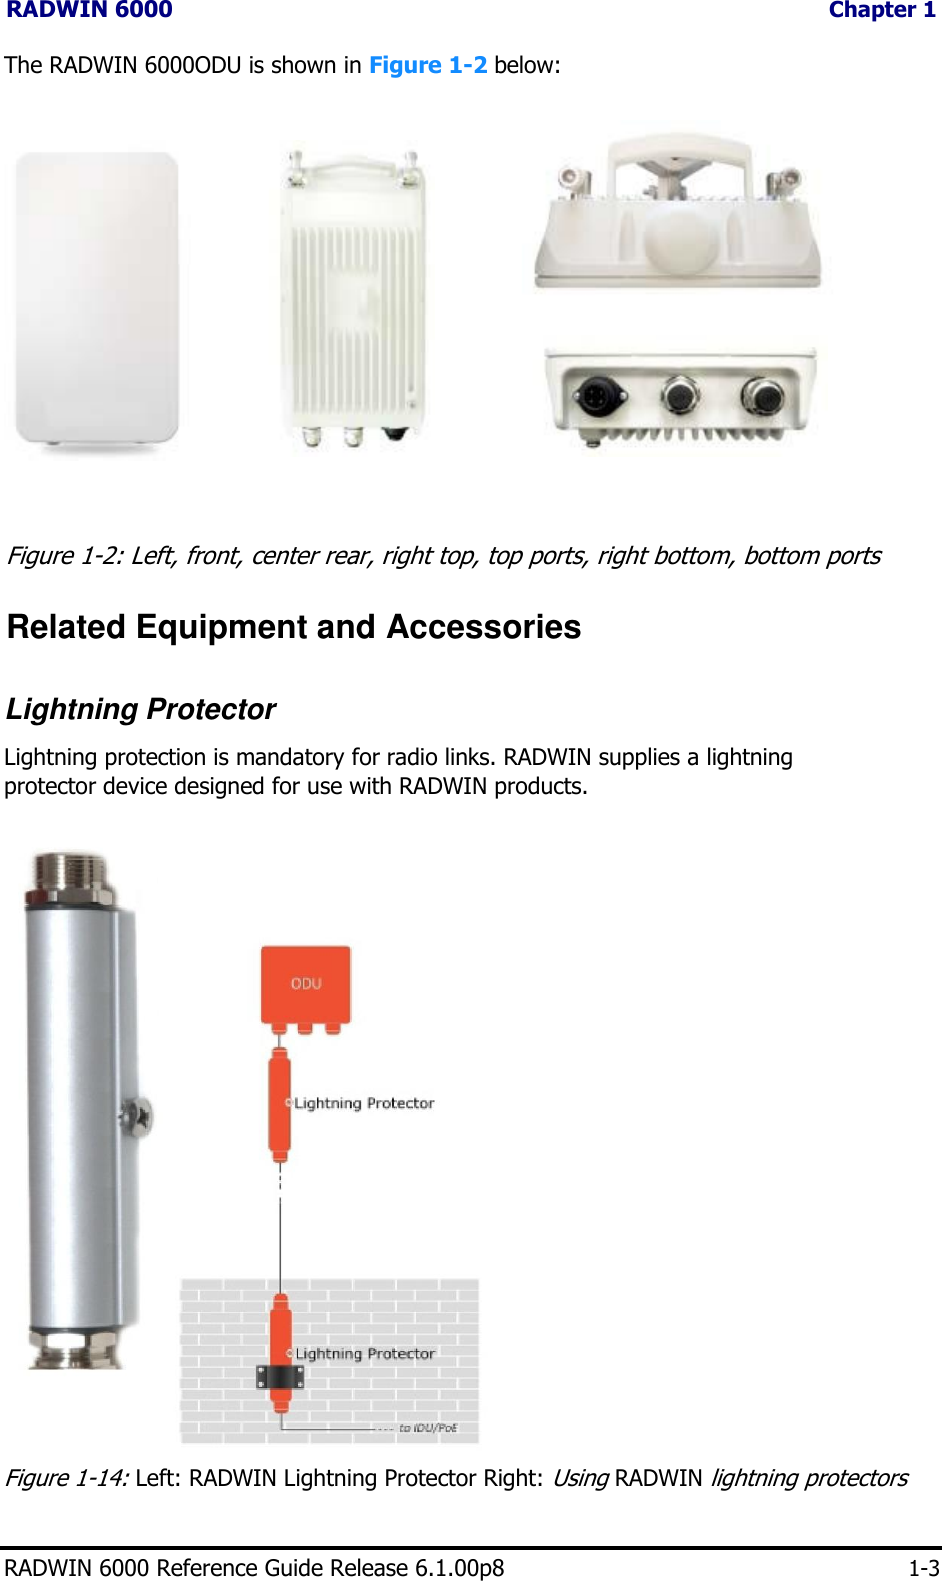 RADWIN 6000                  Chapter 1  The RADWIN 6000ODU is shown in Figure 1-2 below:                                            Figure 1-2: Left, front, center rear, right top, top ports, right bottom, bottom ports  Related Equipment and Accessories     Lightning Protector  Lightning protection is mandatory for radio links. RADWIN supplies a lightning protector device designed for use with RADWIN products.                                Figure 1-14: Left: RADWIN Lightning Protector Right: Using RADWIN lightning protectors    RADWIN 6000 Reference Guide Release 6.1.00p8 1-3   